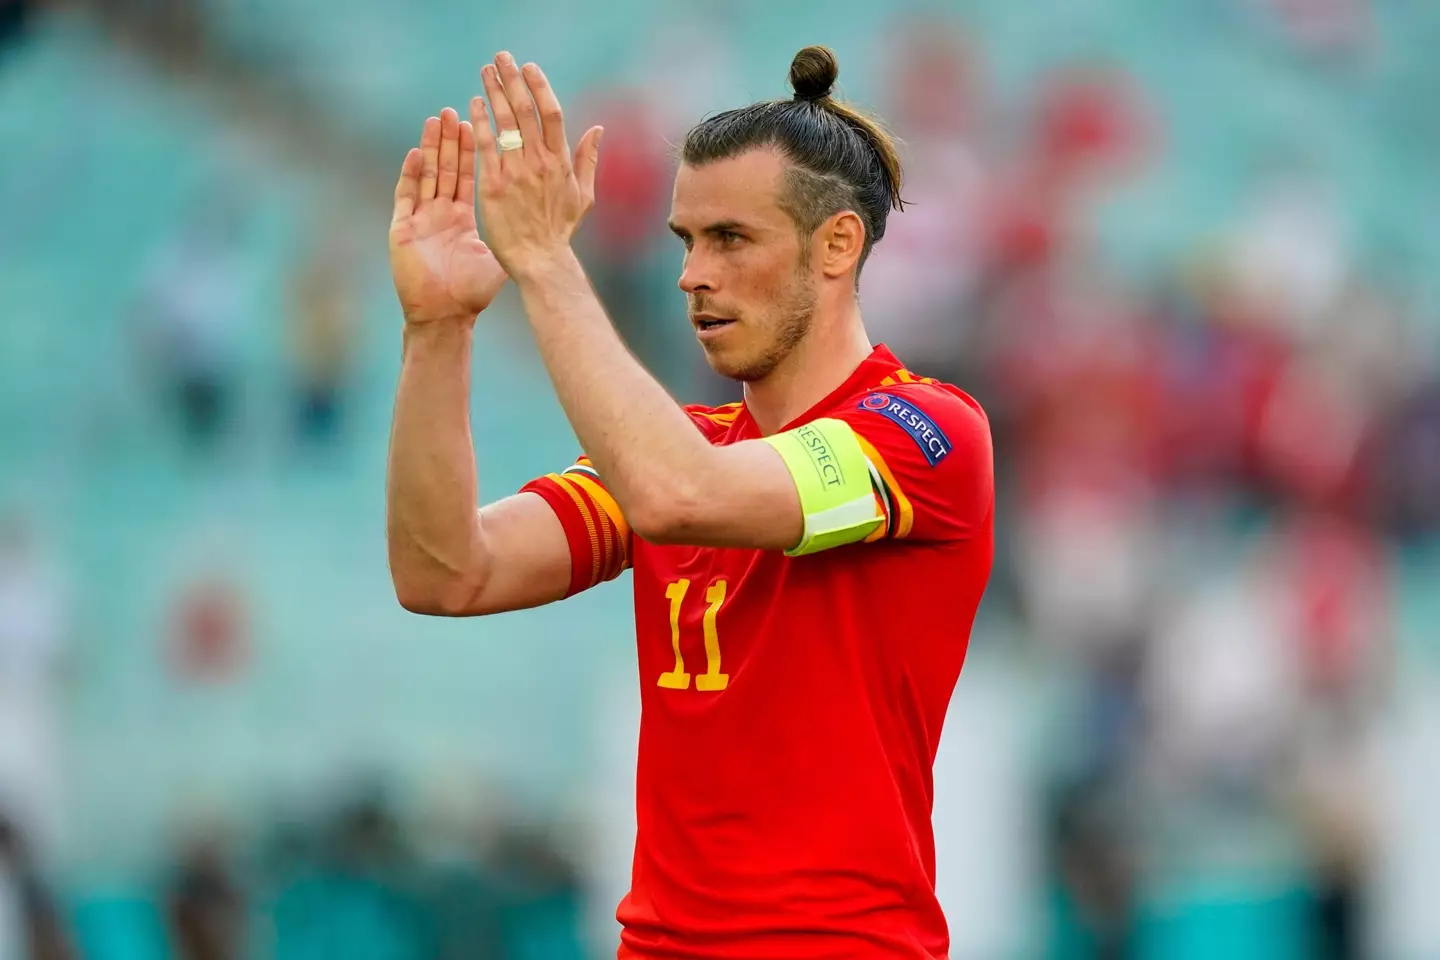 Gareth Bale is the "best British player" to play abroad ahead of David Beckham, according to Rio Ferdinand.